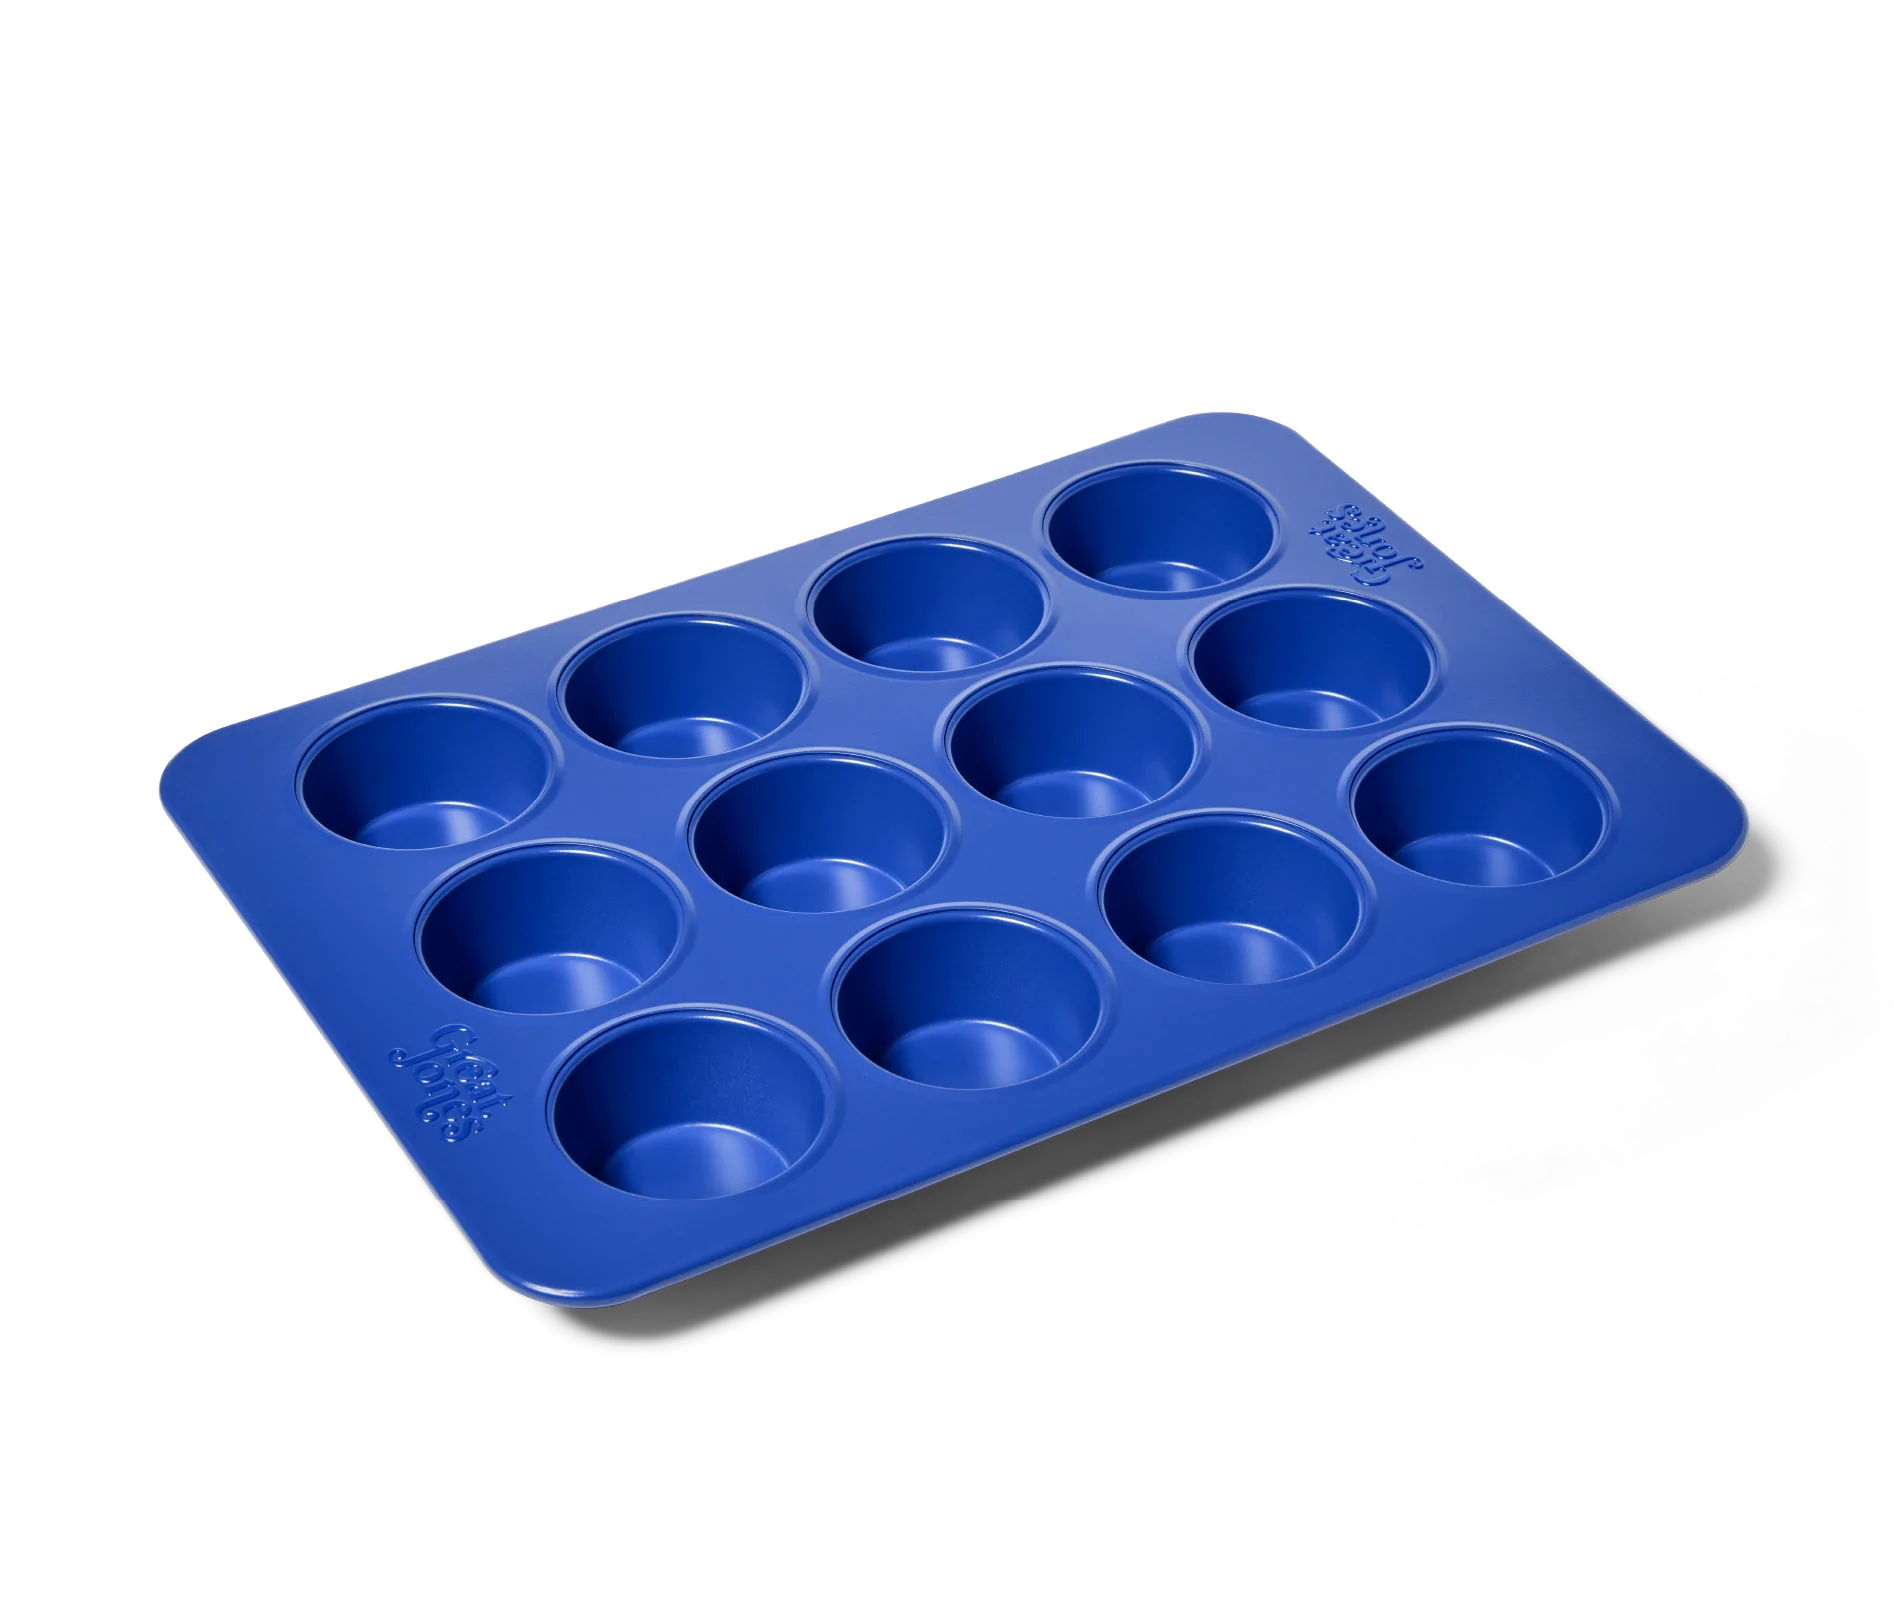 stud muffin muffin pan in blue on a white background